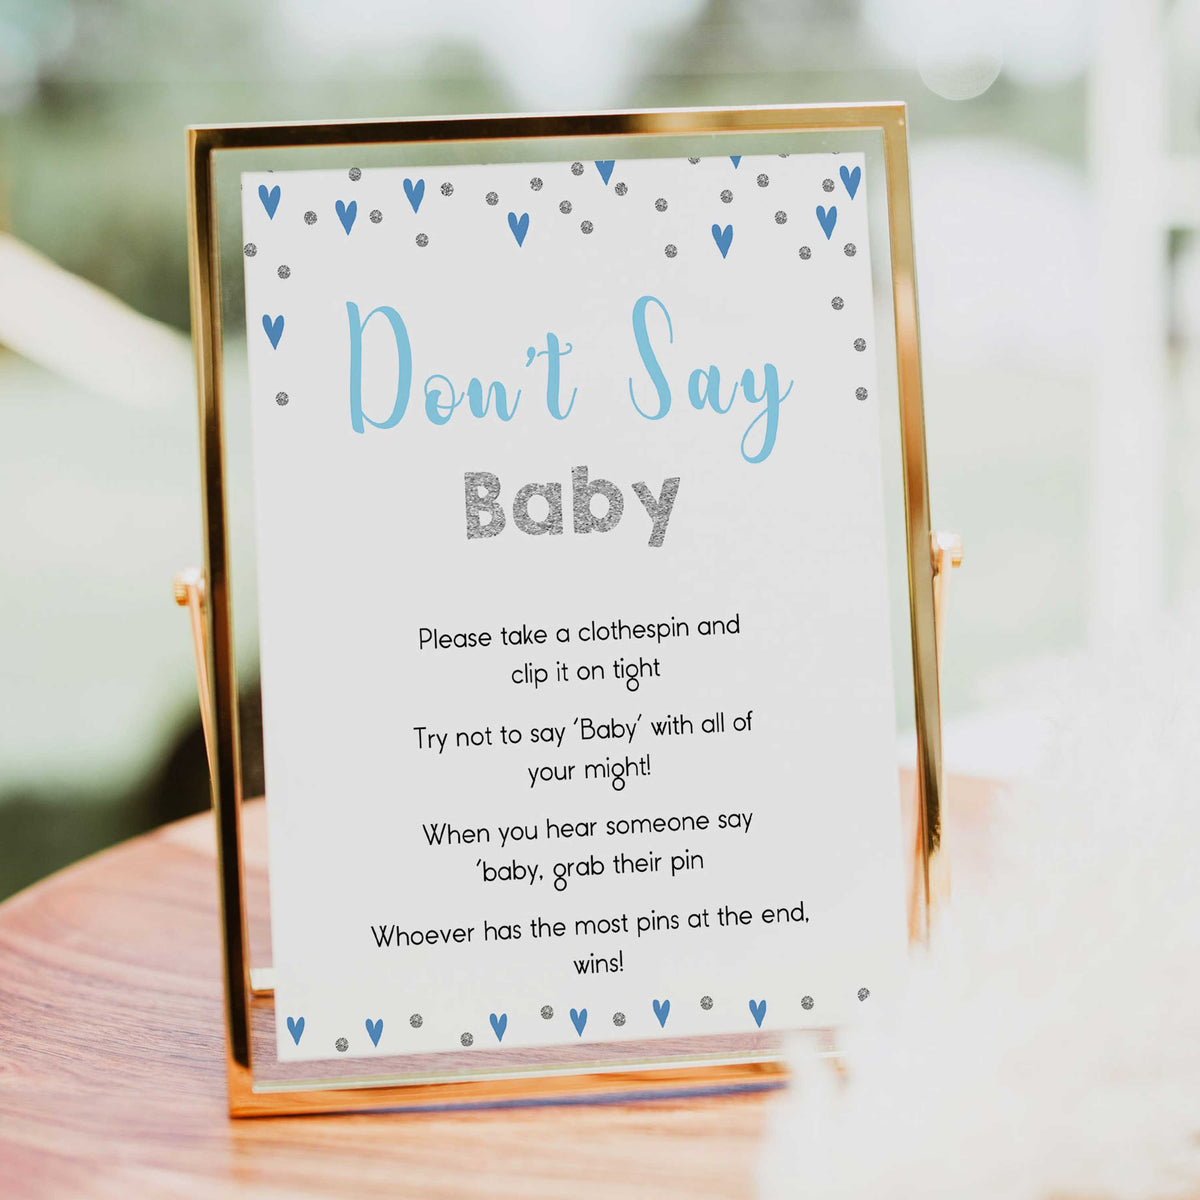 Don't say baby game, baby clothes pin game, Printable baby shower games, small blue hearts fun baby games, baby shower games, fun baby shower ideas, top baby shower ideas, silver baby shower, blue hearts baby shower ideas